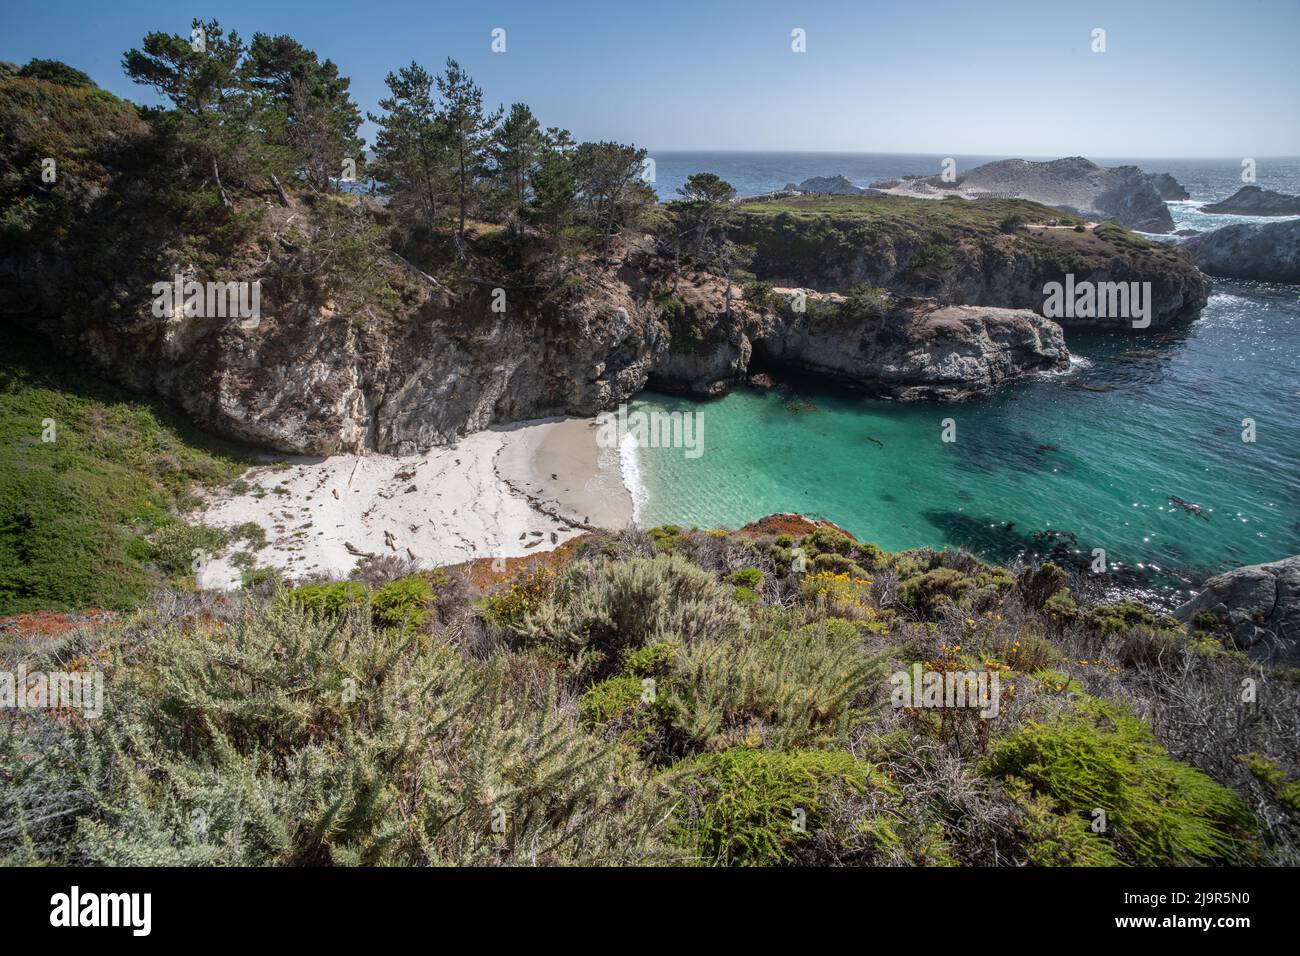 The coastline at Point Lobos state reserve in Monterey, California is a stunningly beautiful landscape with cliffs, turquoise waters, and trees. Stock Photo